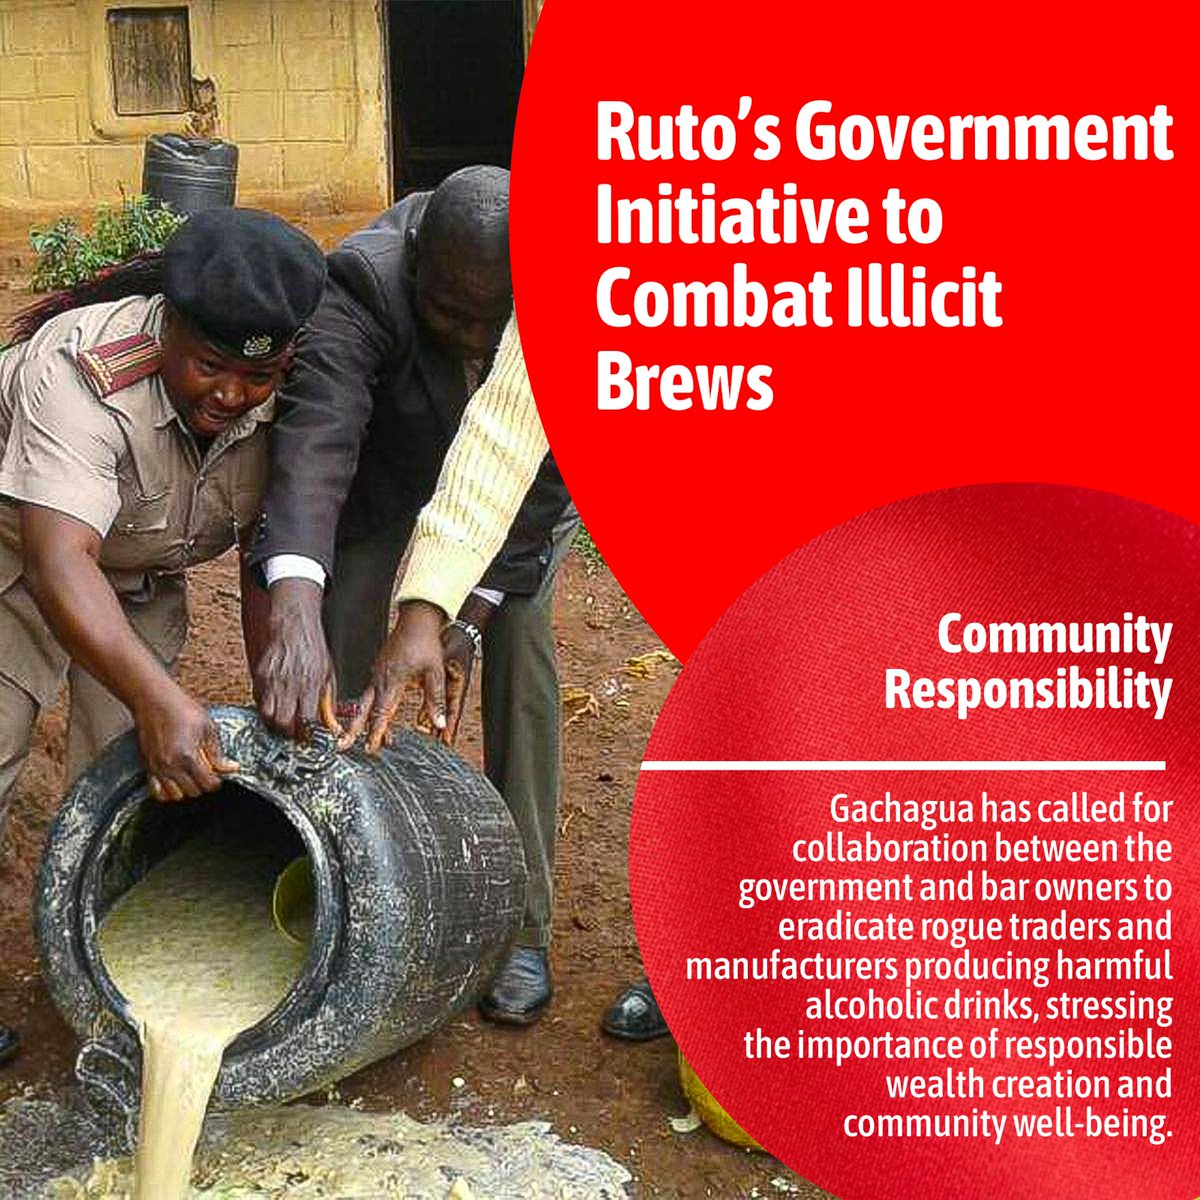 The government being is calling for community responsibility Stop Illicit Brew #GachaguaVsIllicitBrews #RigathiOnAssignment